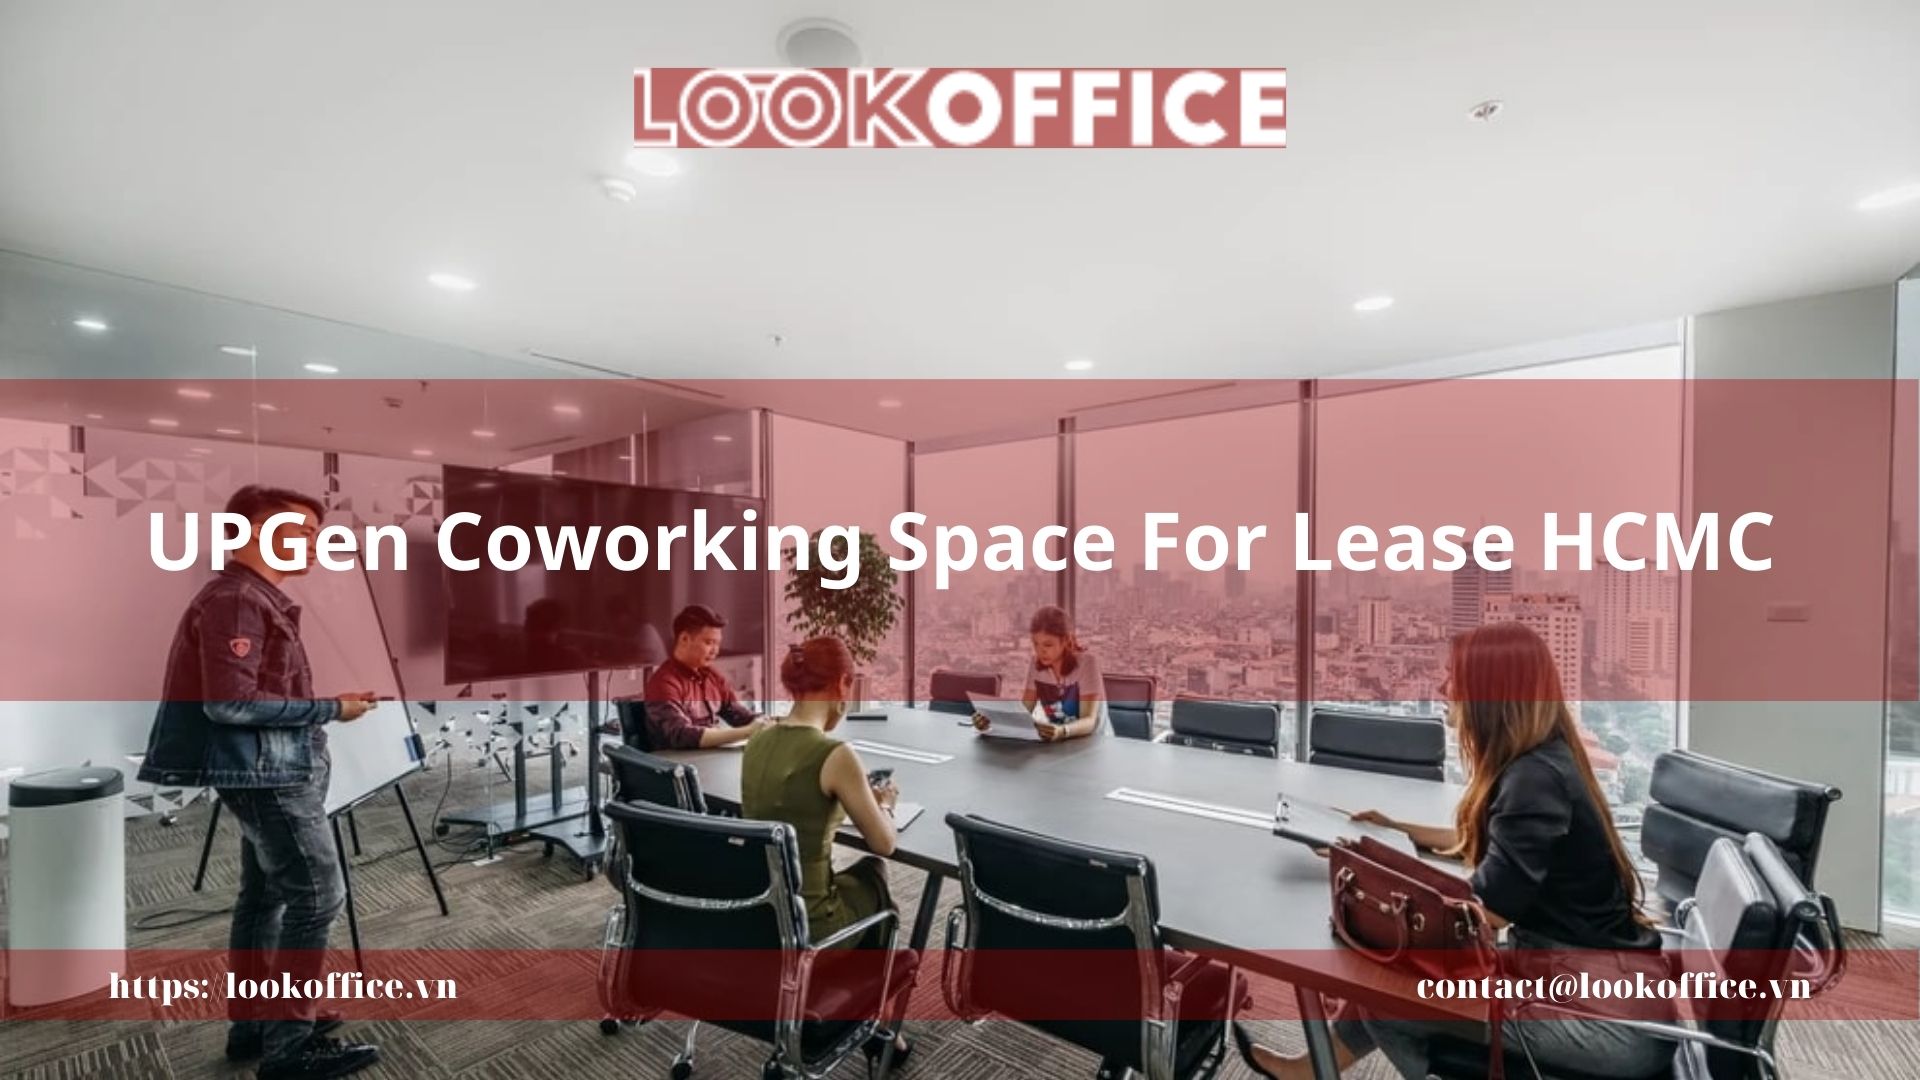 UPGen Coworking Space For Lease HCMC